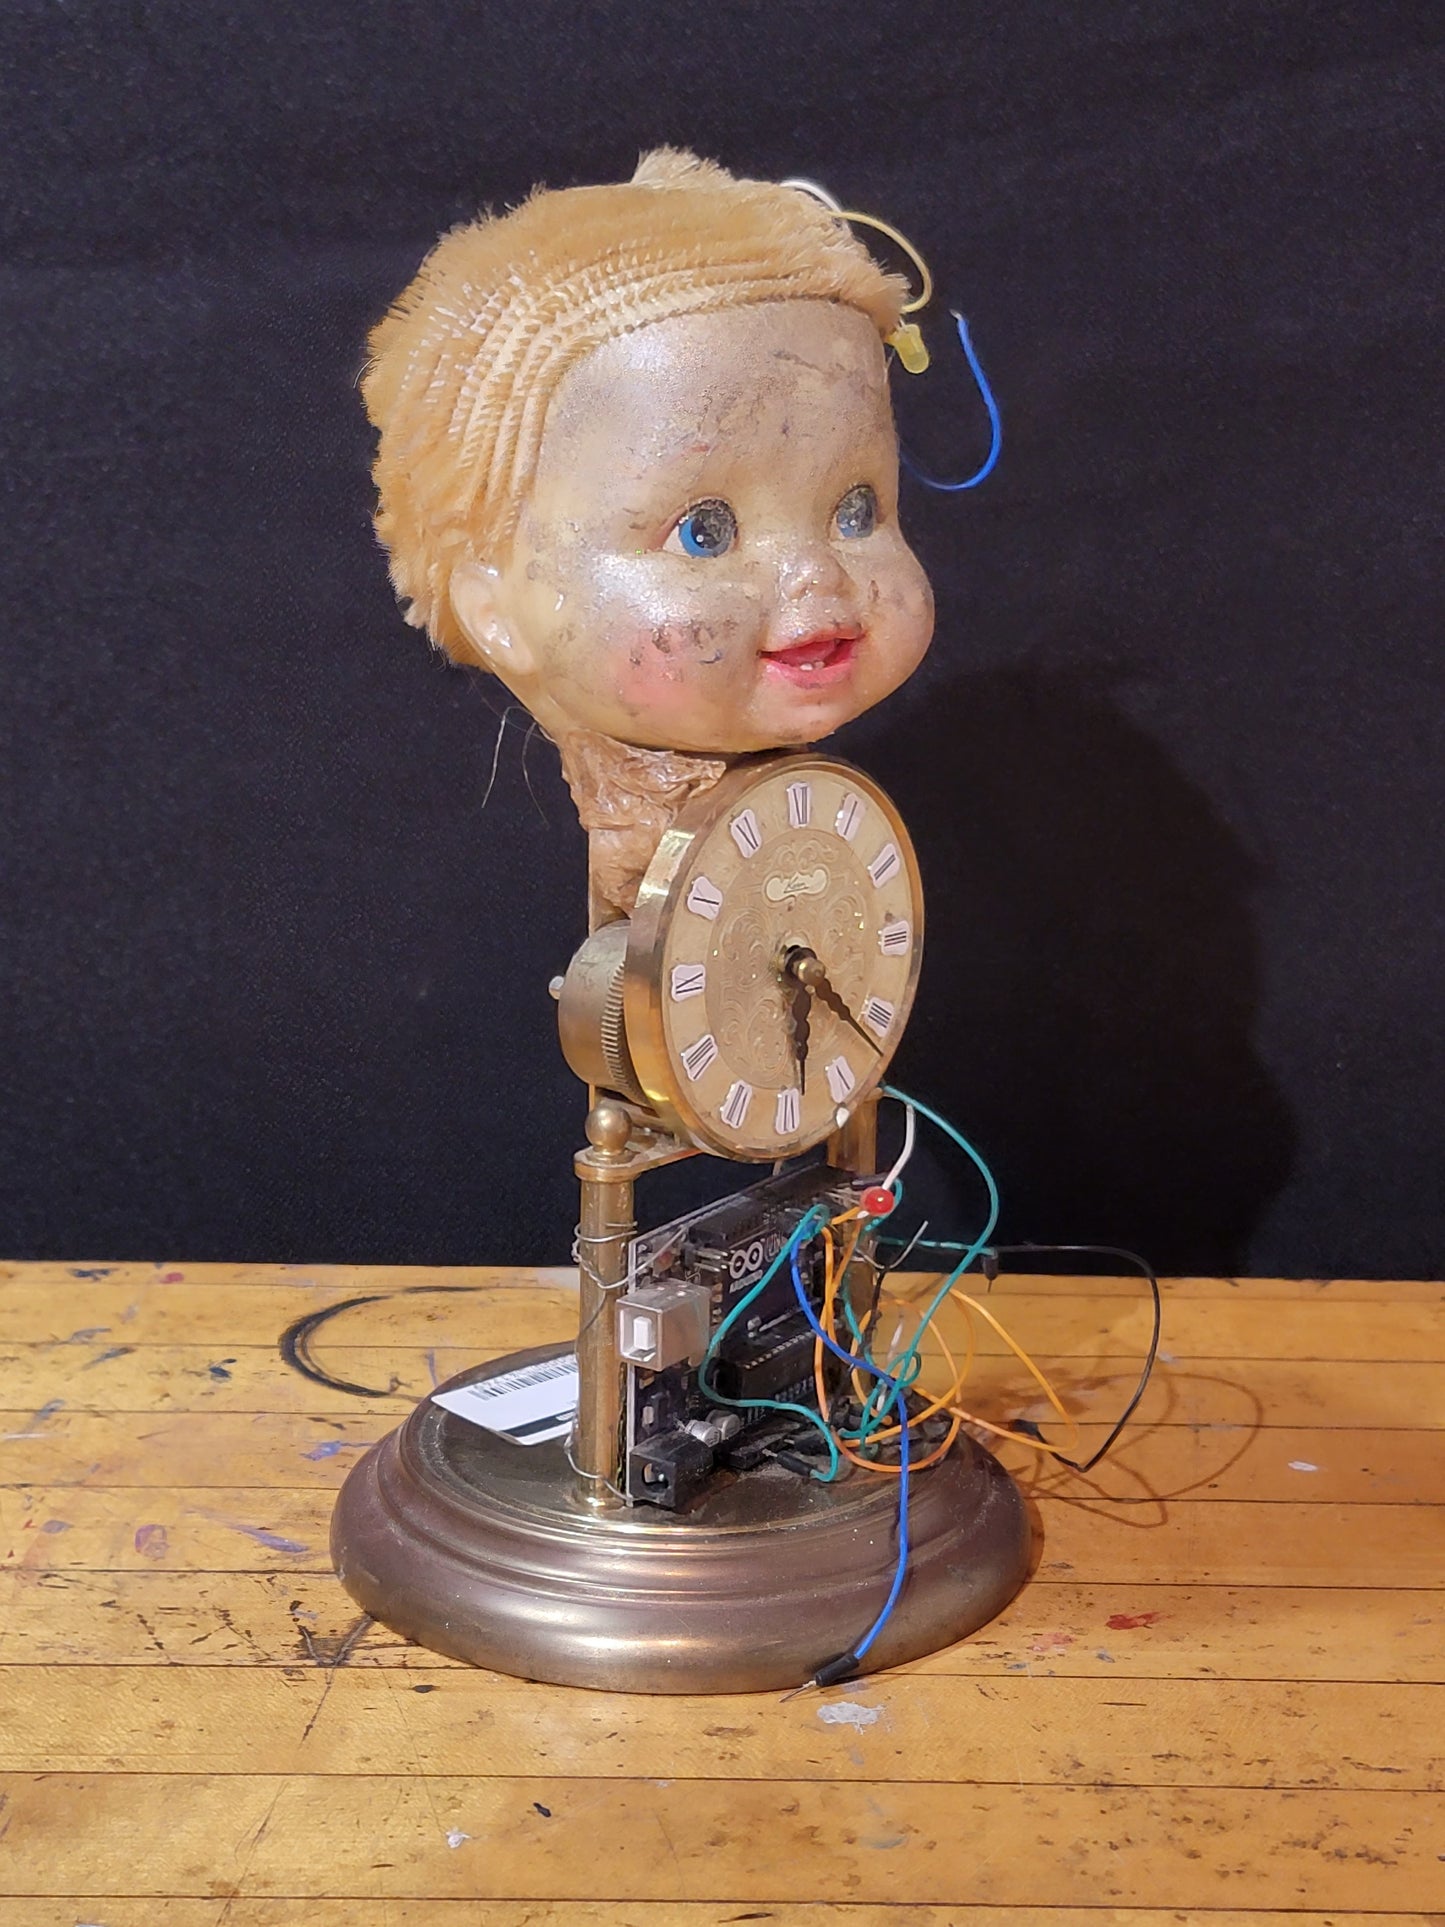 Wired Doll Assemblage Art